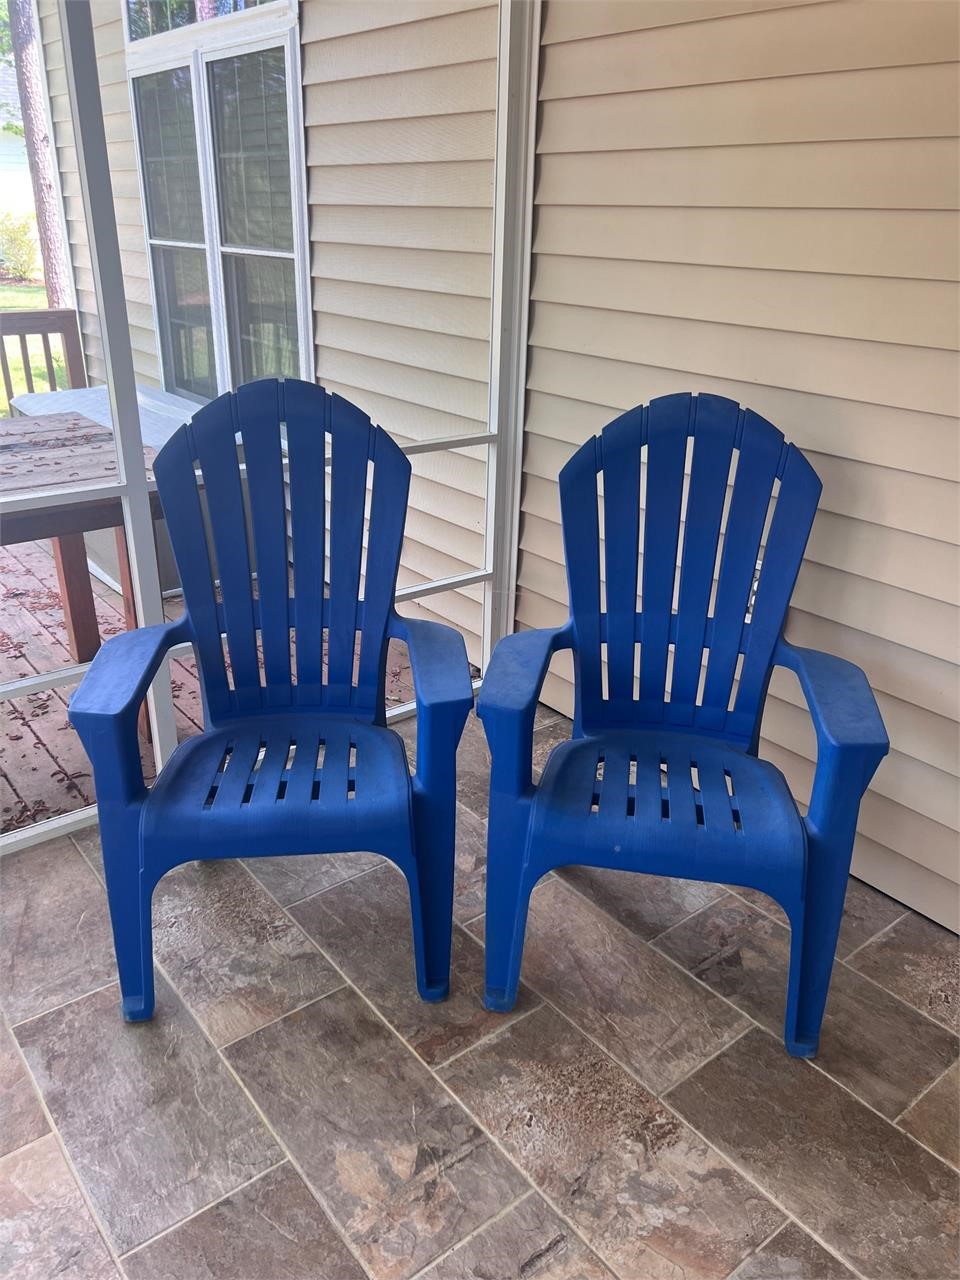 High back plastic outdoor chairs